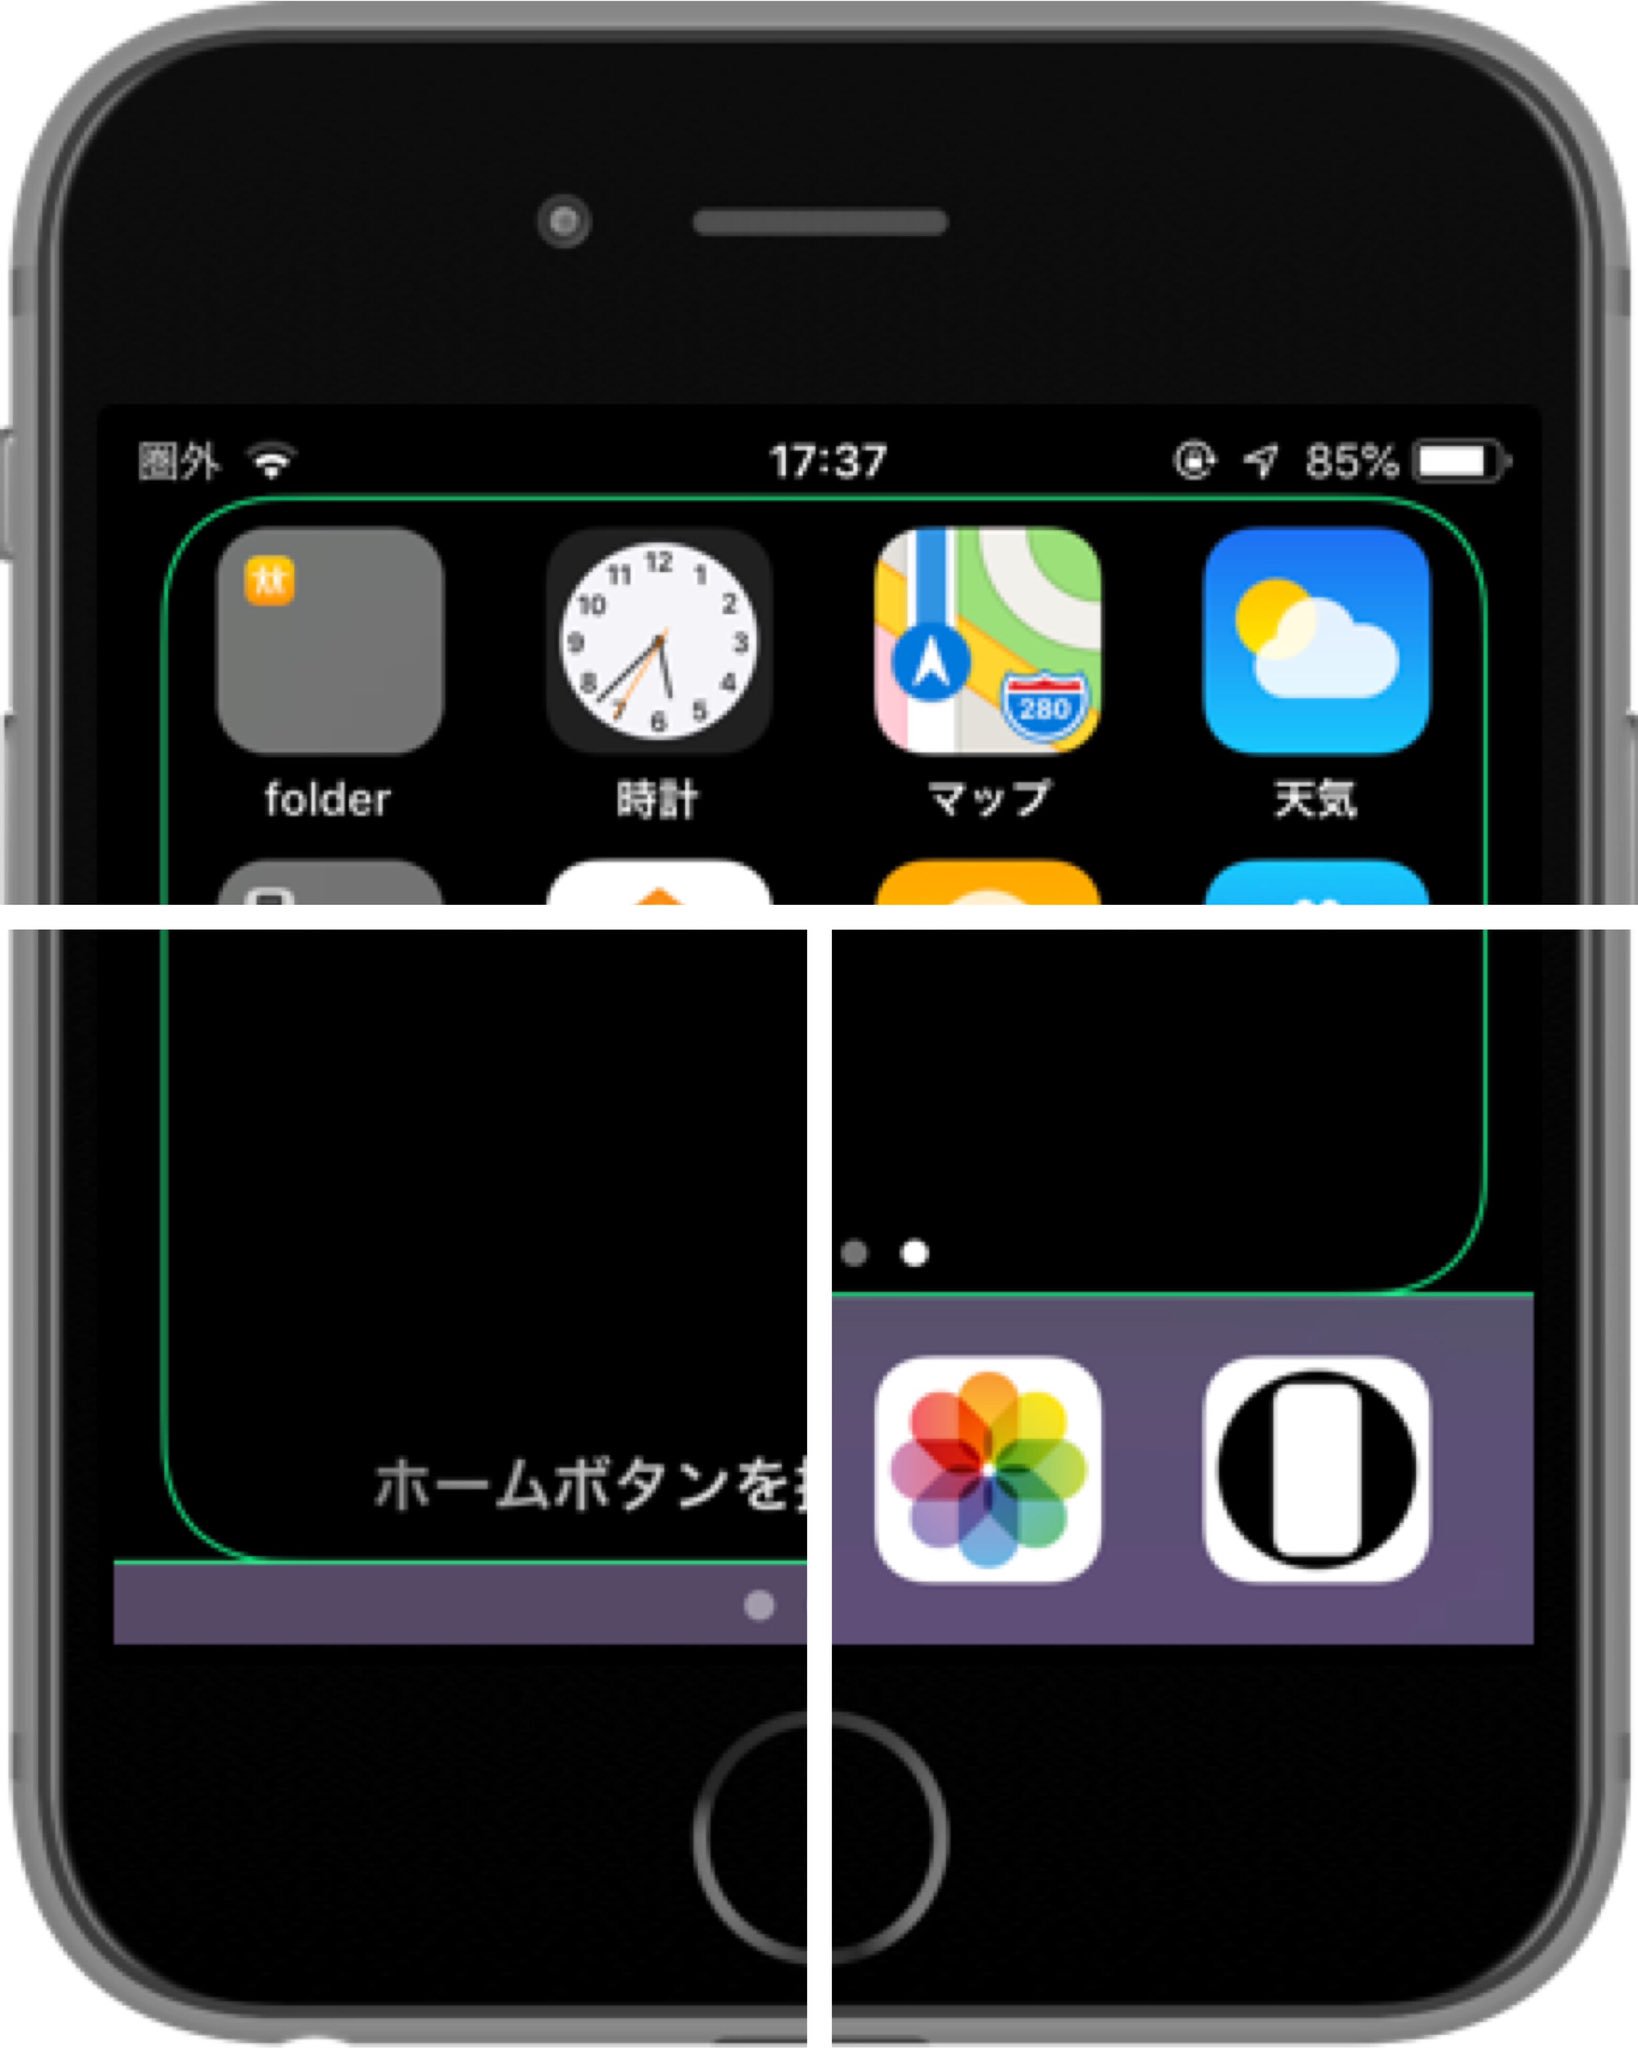 Hide Mysterious Iphone Wallpaper 不思議なiphone壁紙 ベゼル付きiphoneのために曲線と直線をつなぐ黒背景の壁紙 ホーム画面ロック画面各38セット お使いのiphone用をお選びください Black Background Wallpapers Linking Curve And Straight For